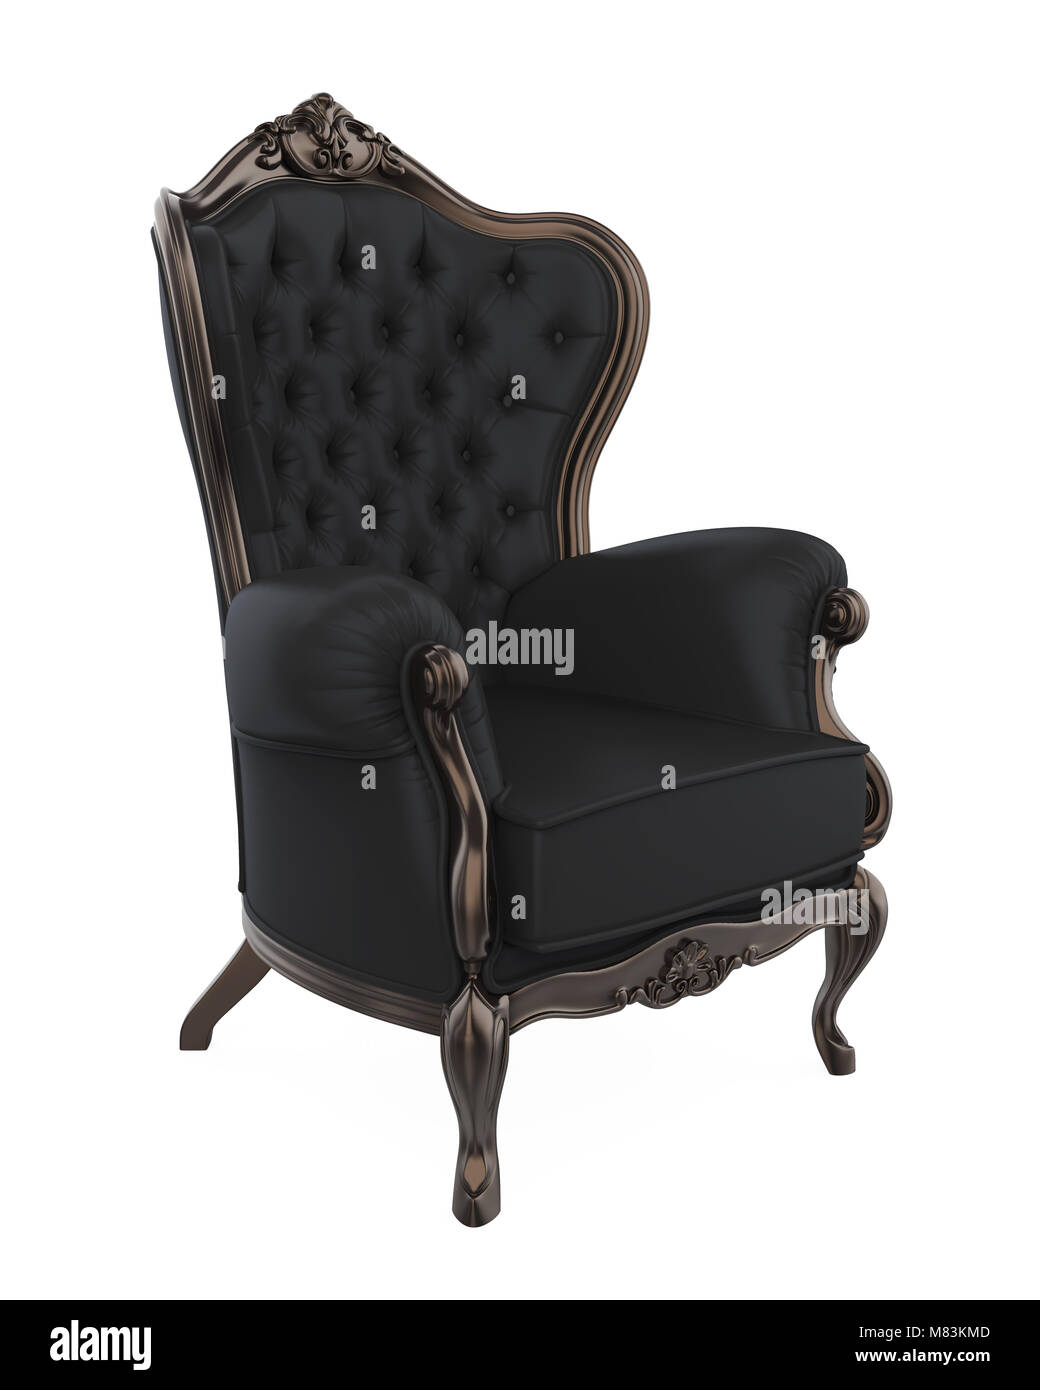 Queen chair Cut Out Stock Images & Pictures - Page 3 - Alamy